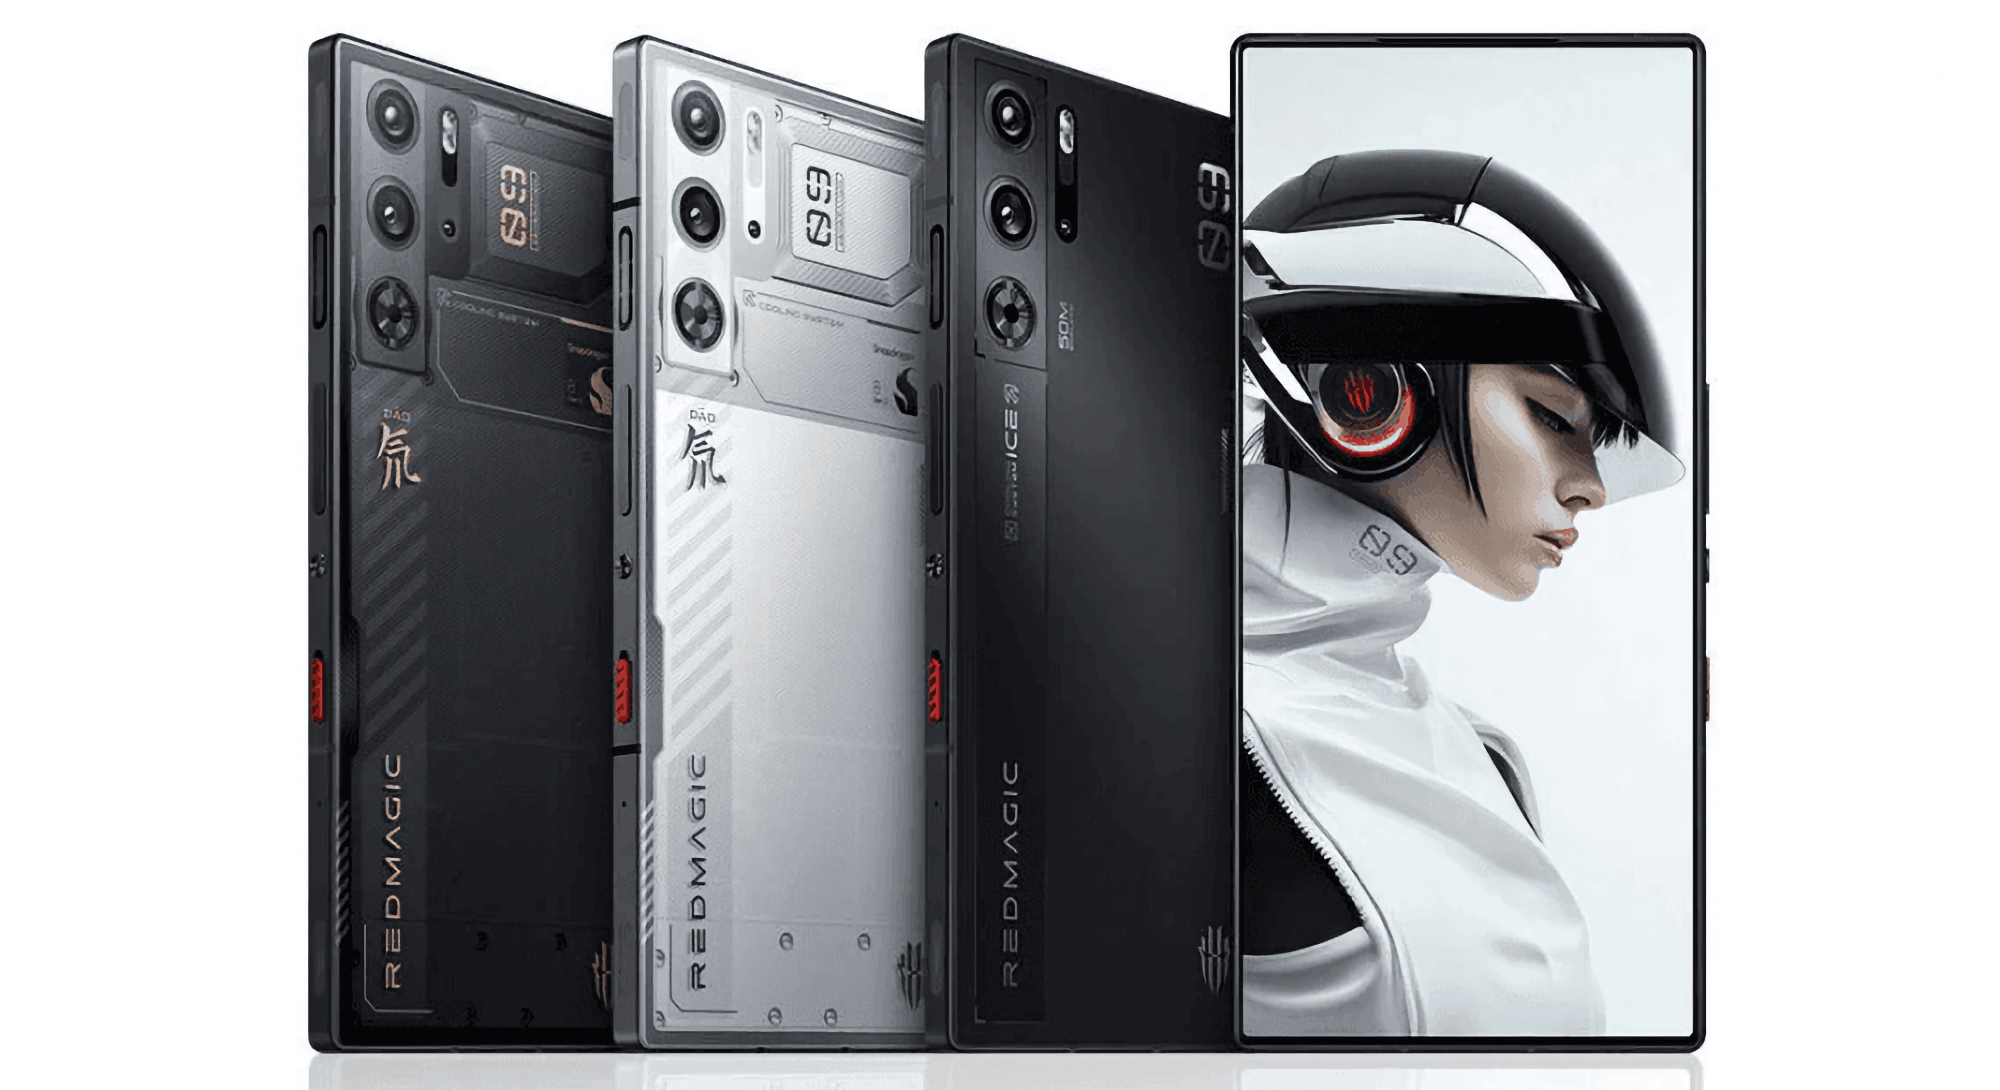 Red Magic 9S Pro is already available for purchase in the global marketplace